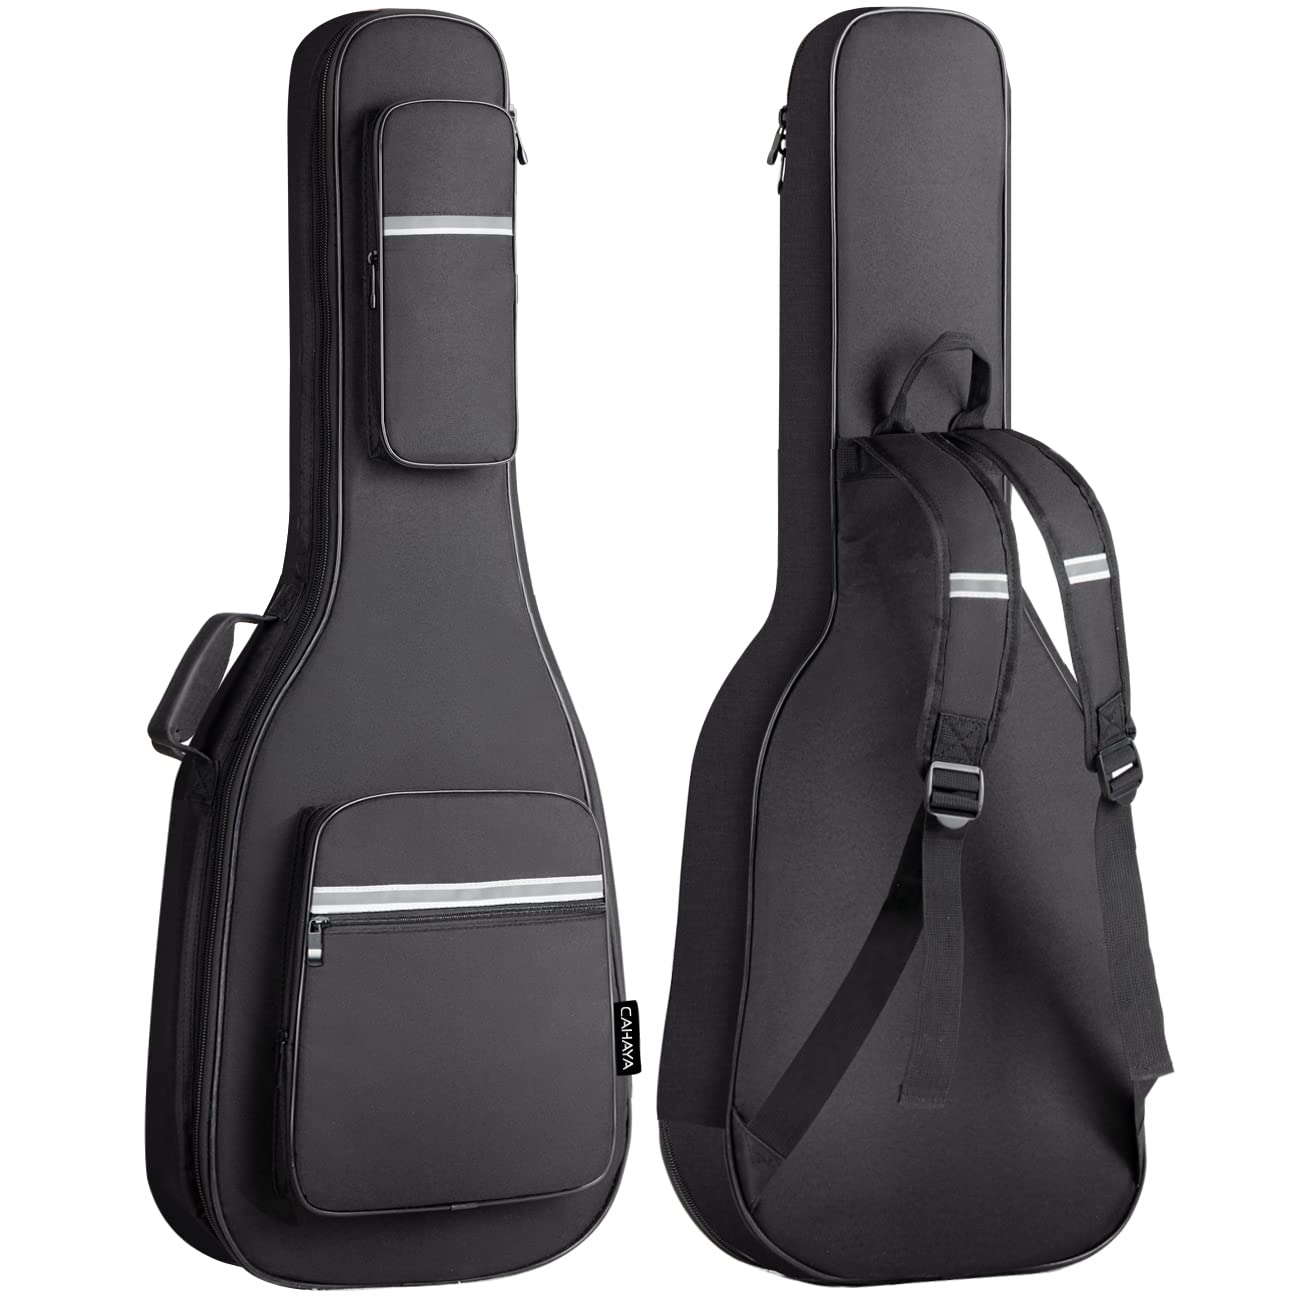 cAHAYA Electric guitar Bag: Padded gig Bag Soft case - 05inch Thick Padding with Reflective Bands cY0201